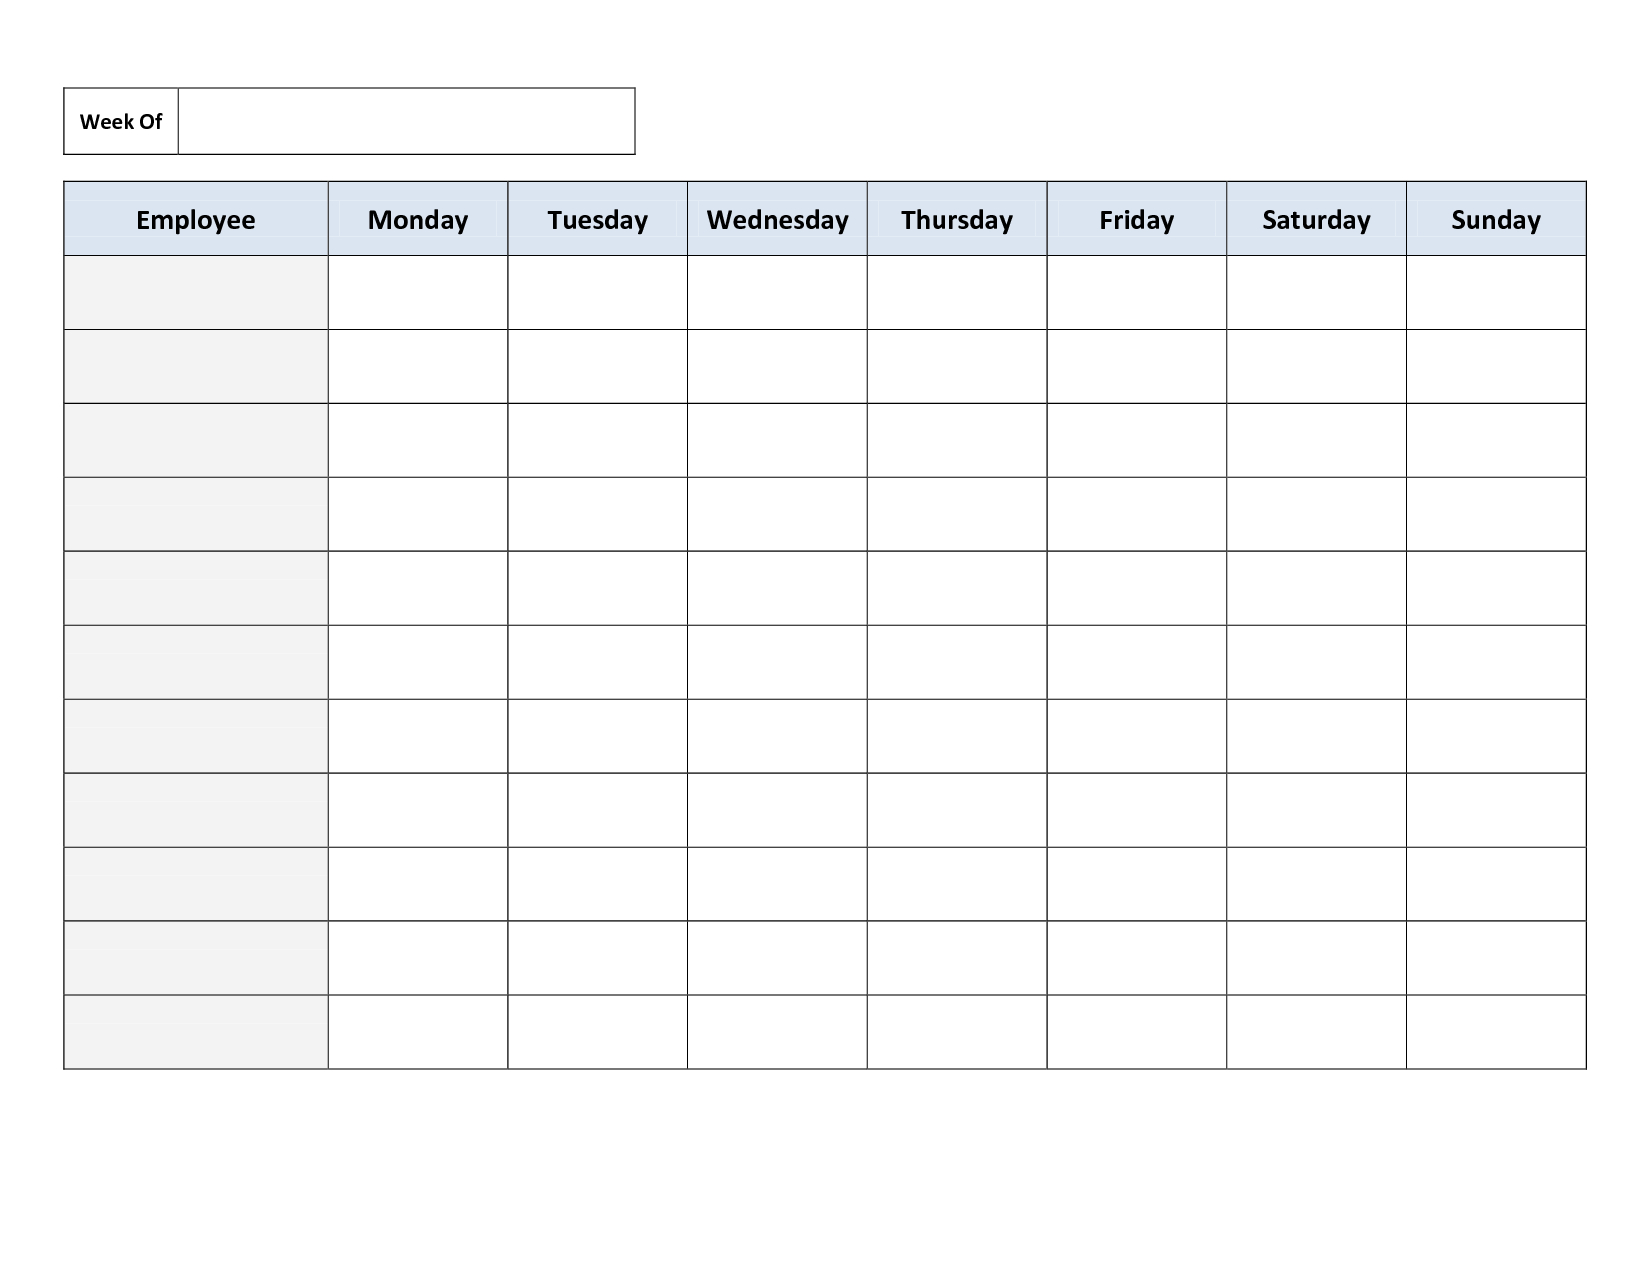 Free Rintable Work Schedule Calendar Weekly Template Excel February - Free Printable Monthly Work Schedule Template